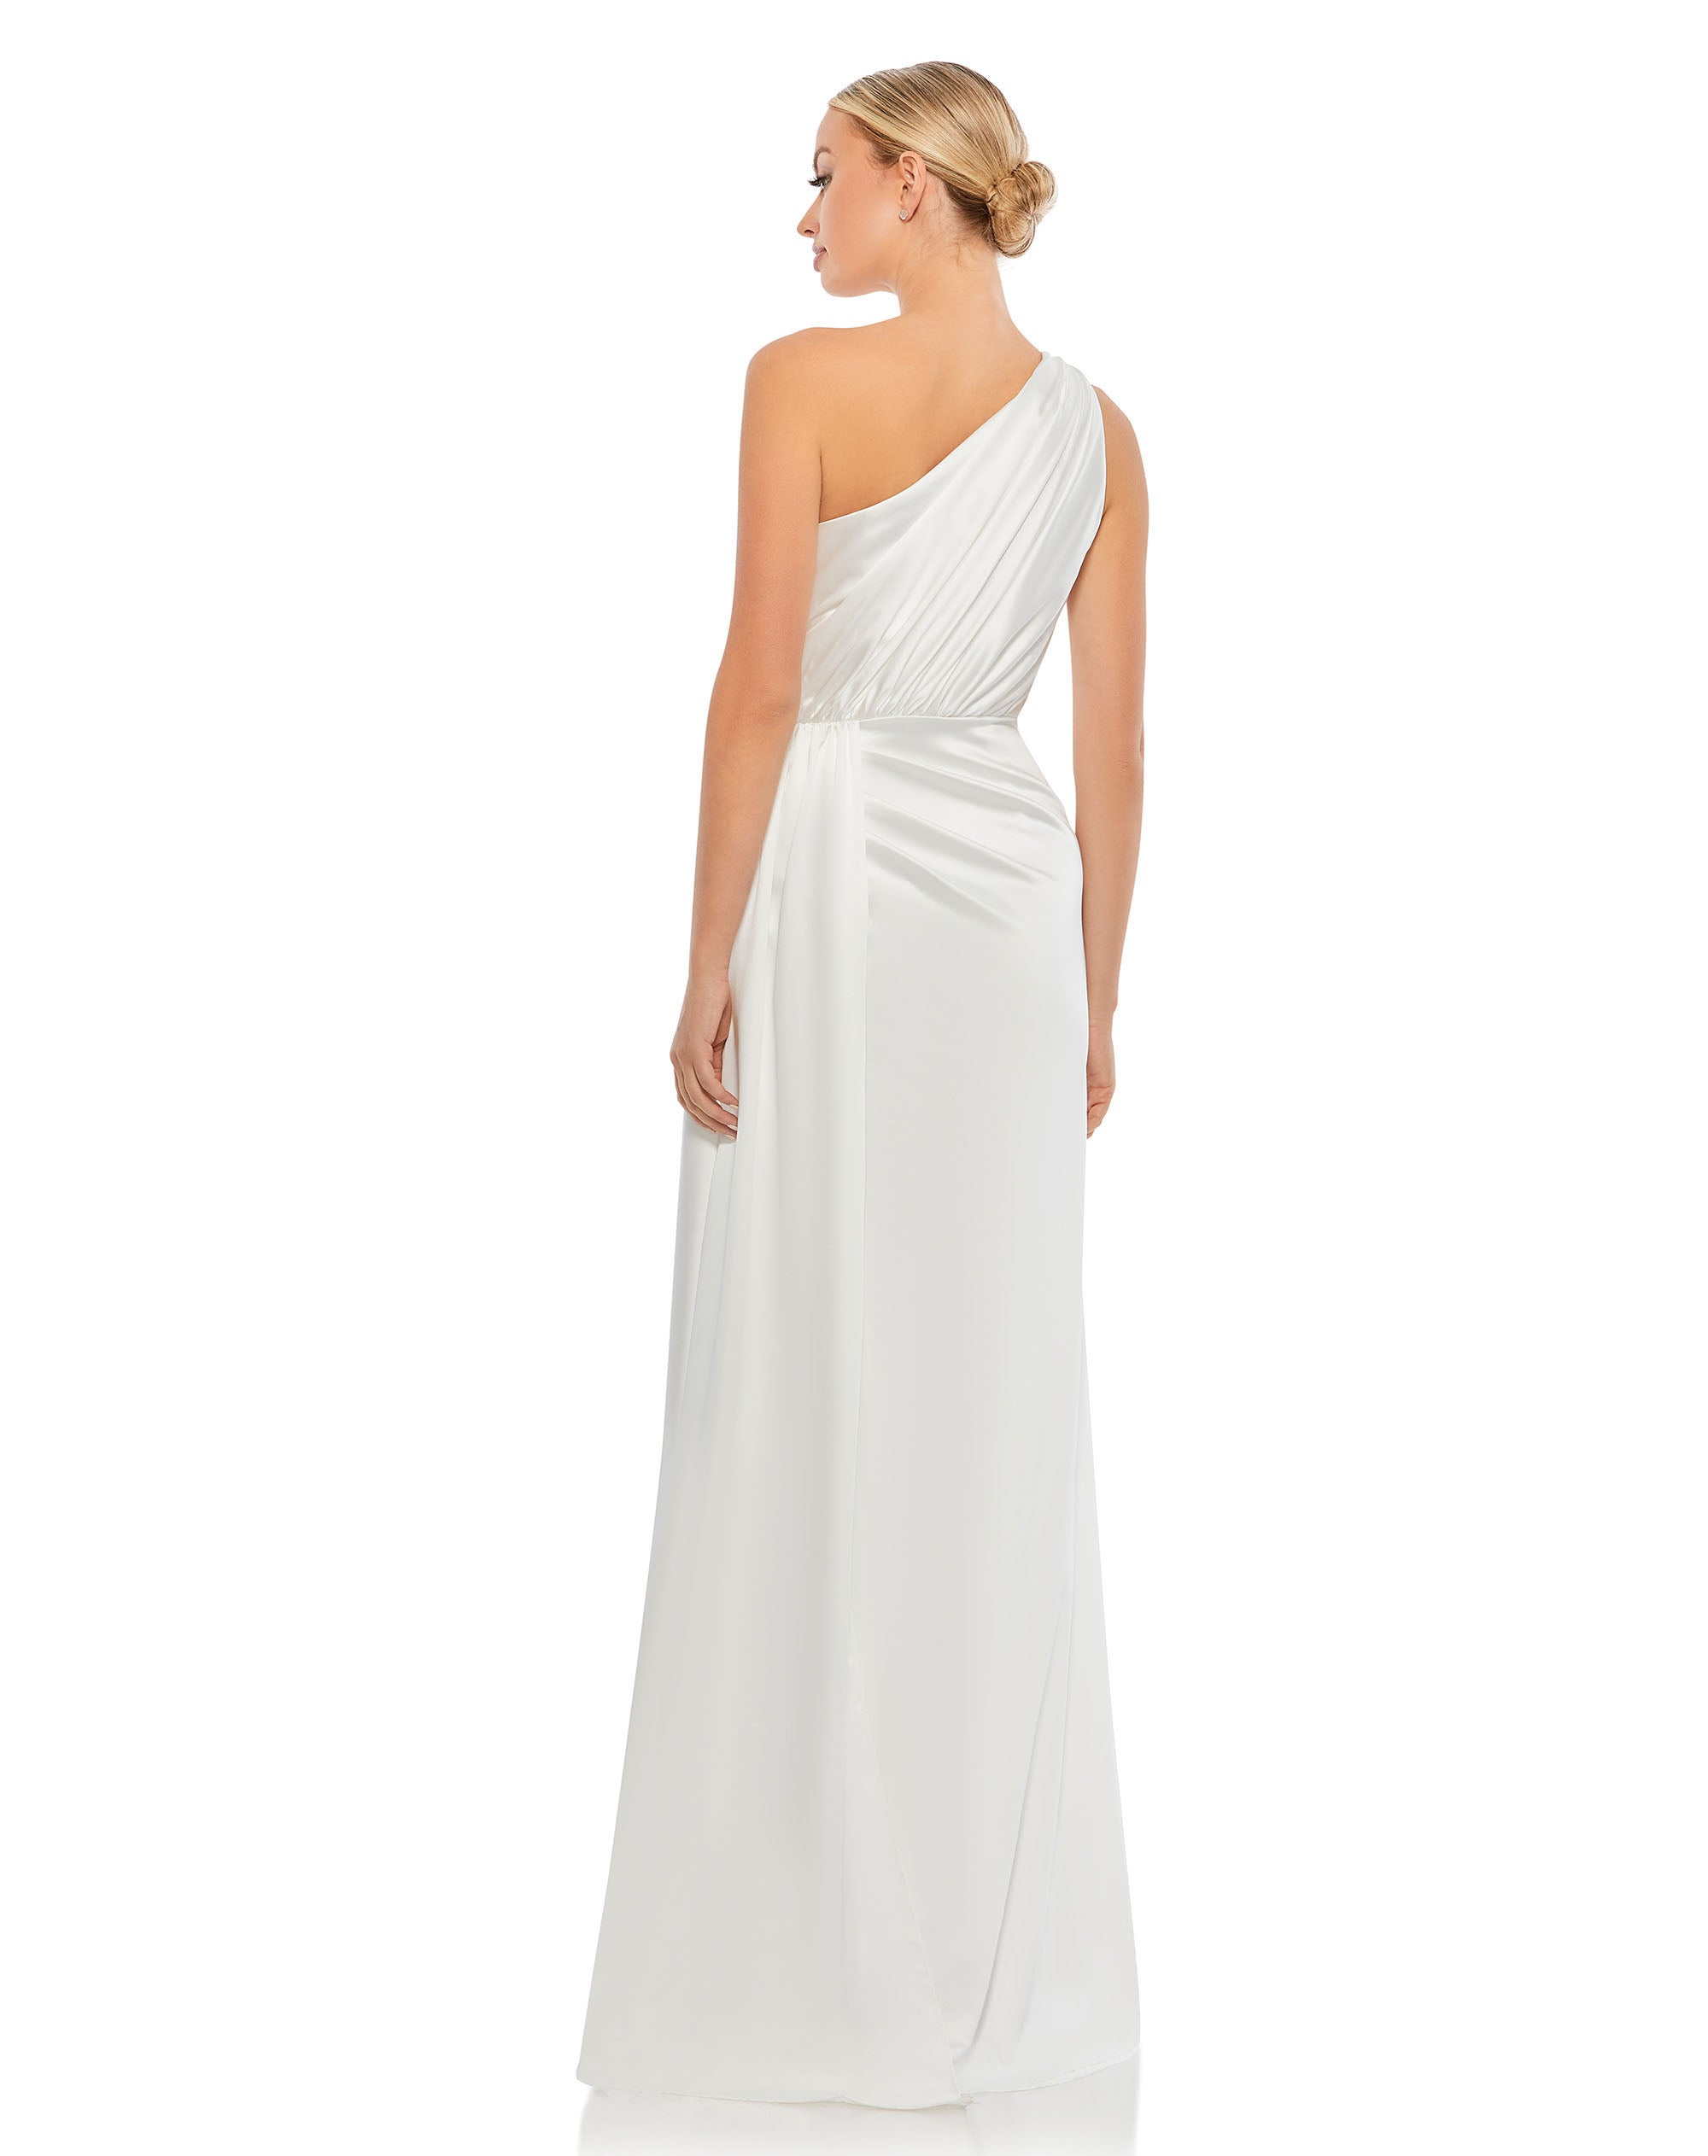 Gathered One Shoulder Satin Faux Wrap Gown - FINAL SALE